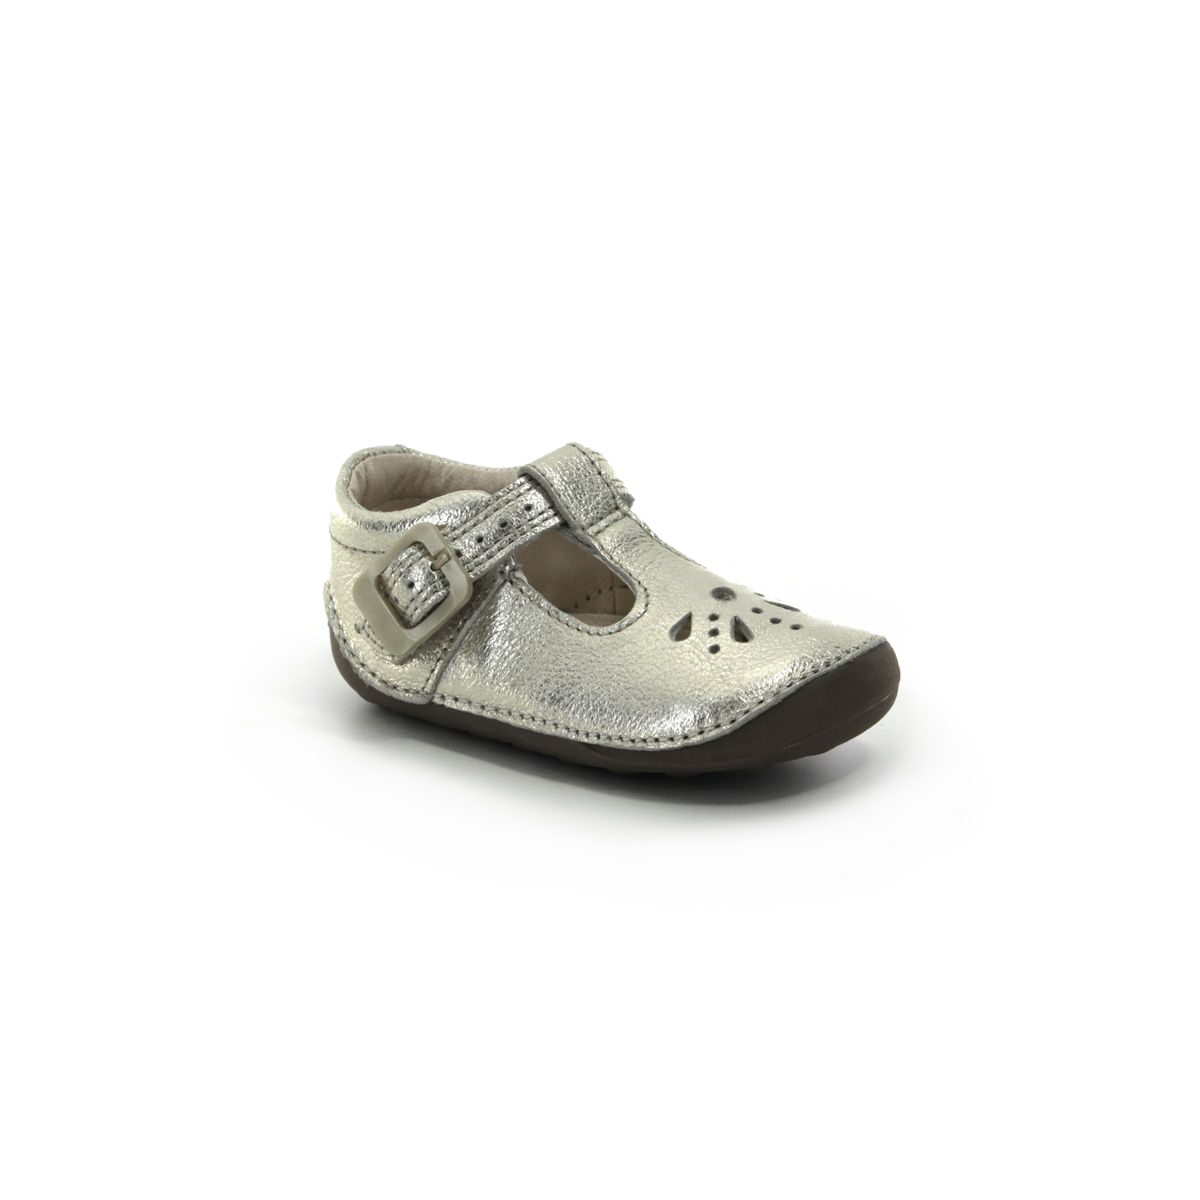 Clarks Little Weave F Fit Gold first shoes